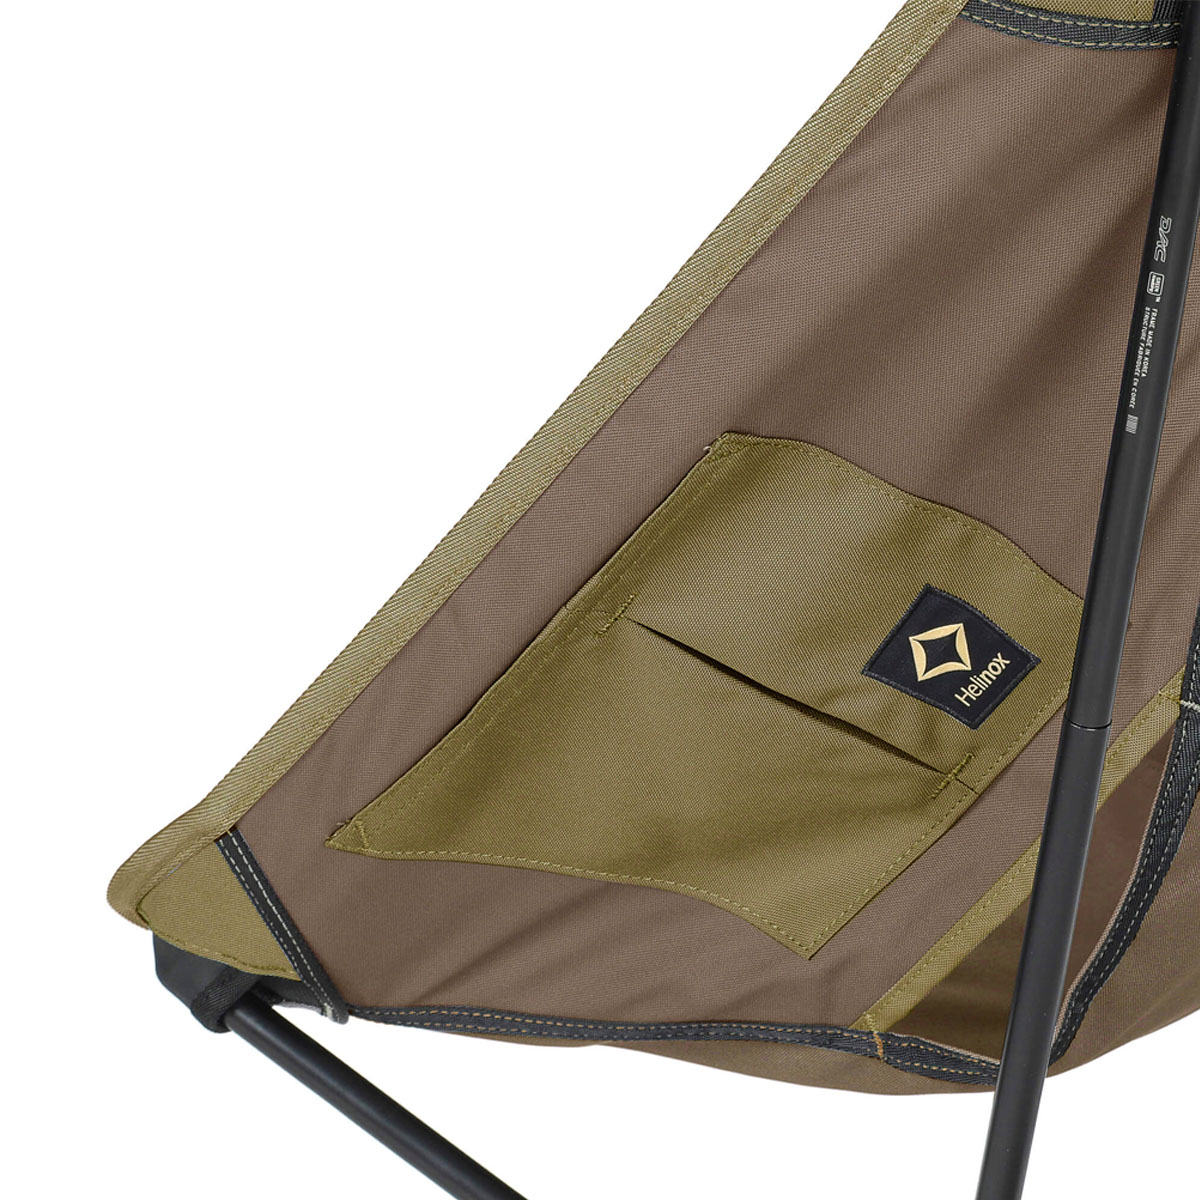 Helinox Tactical Chair One Coyote Tan, with added pockets to secure valuables and gear